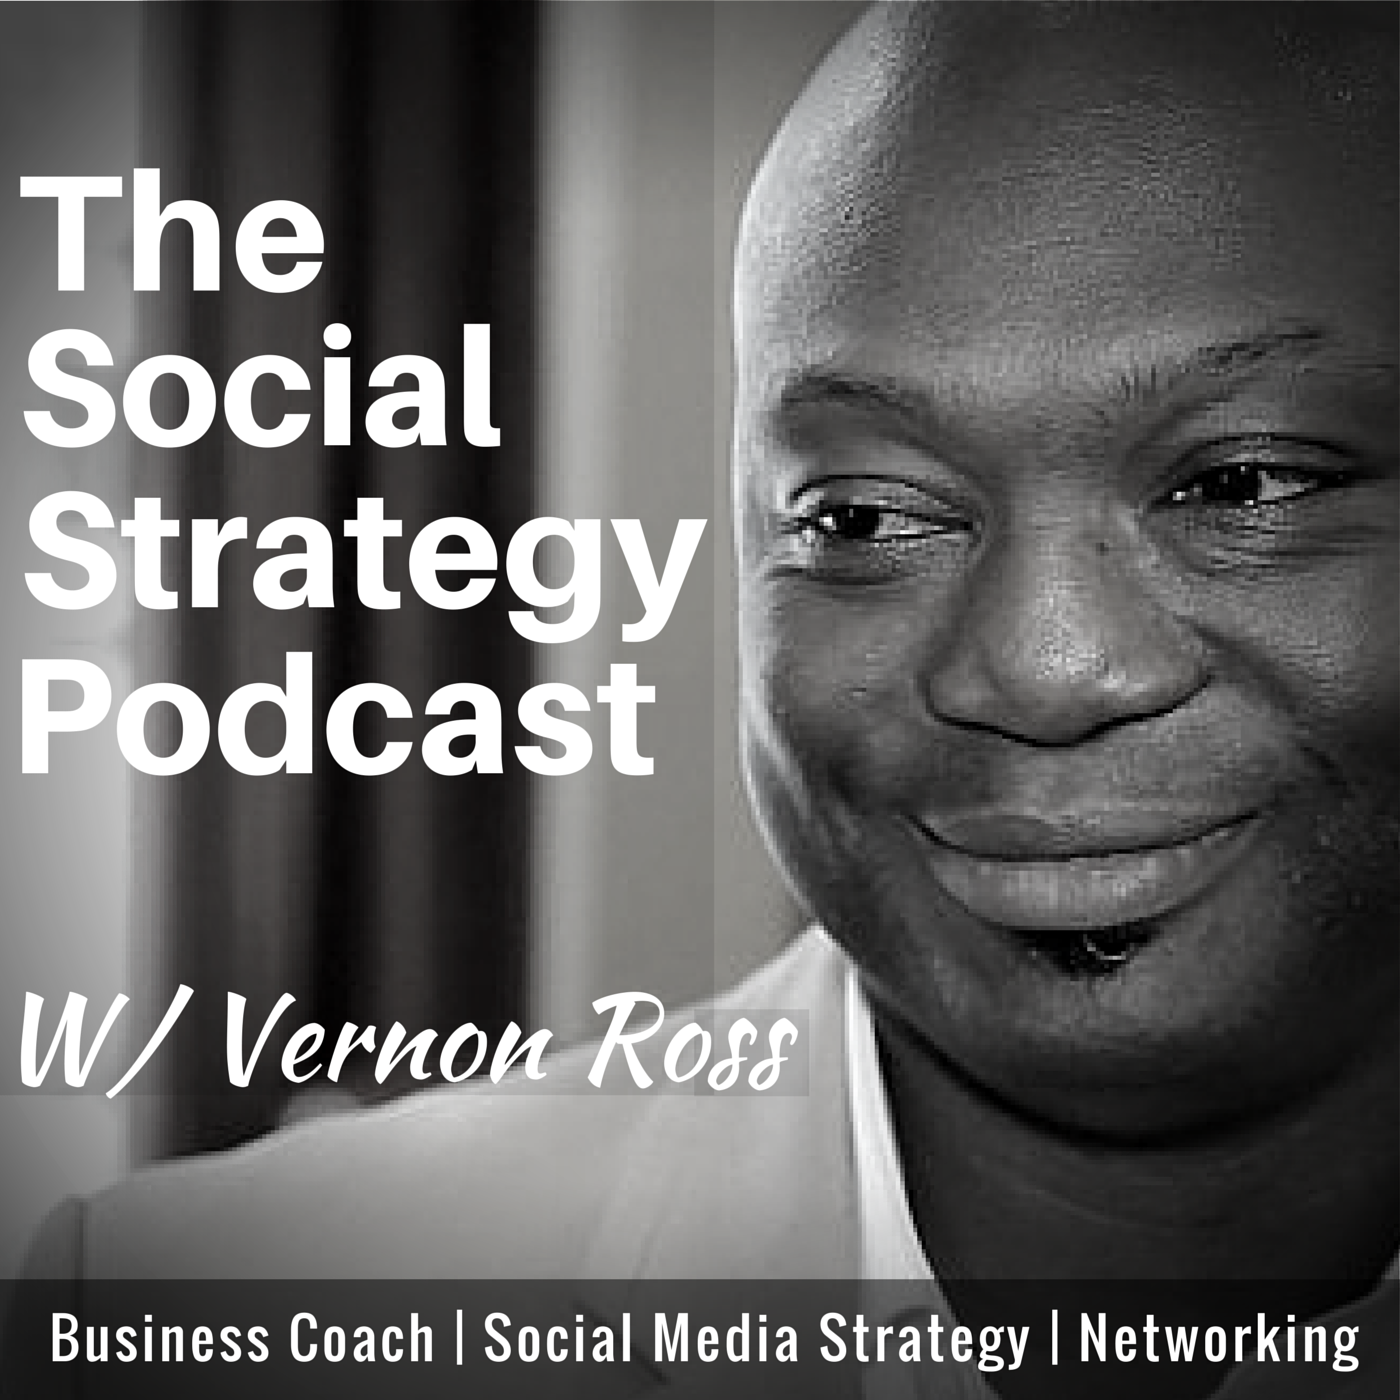 The Social Strategy Podcast: Online Business | Social Media Strategy | Networking | Vernon Ross